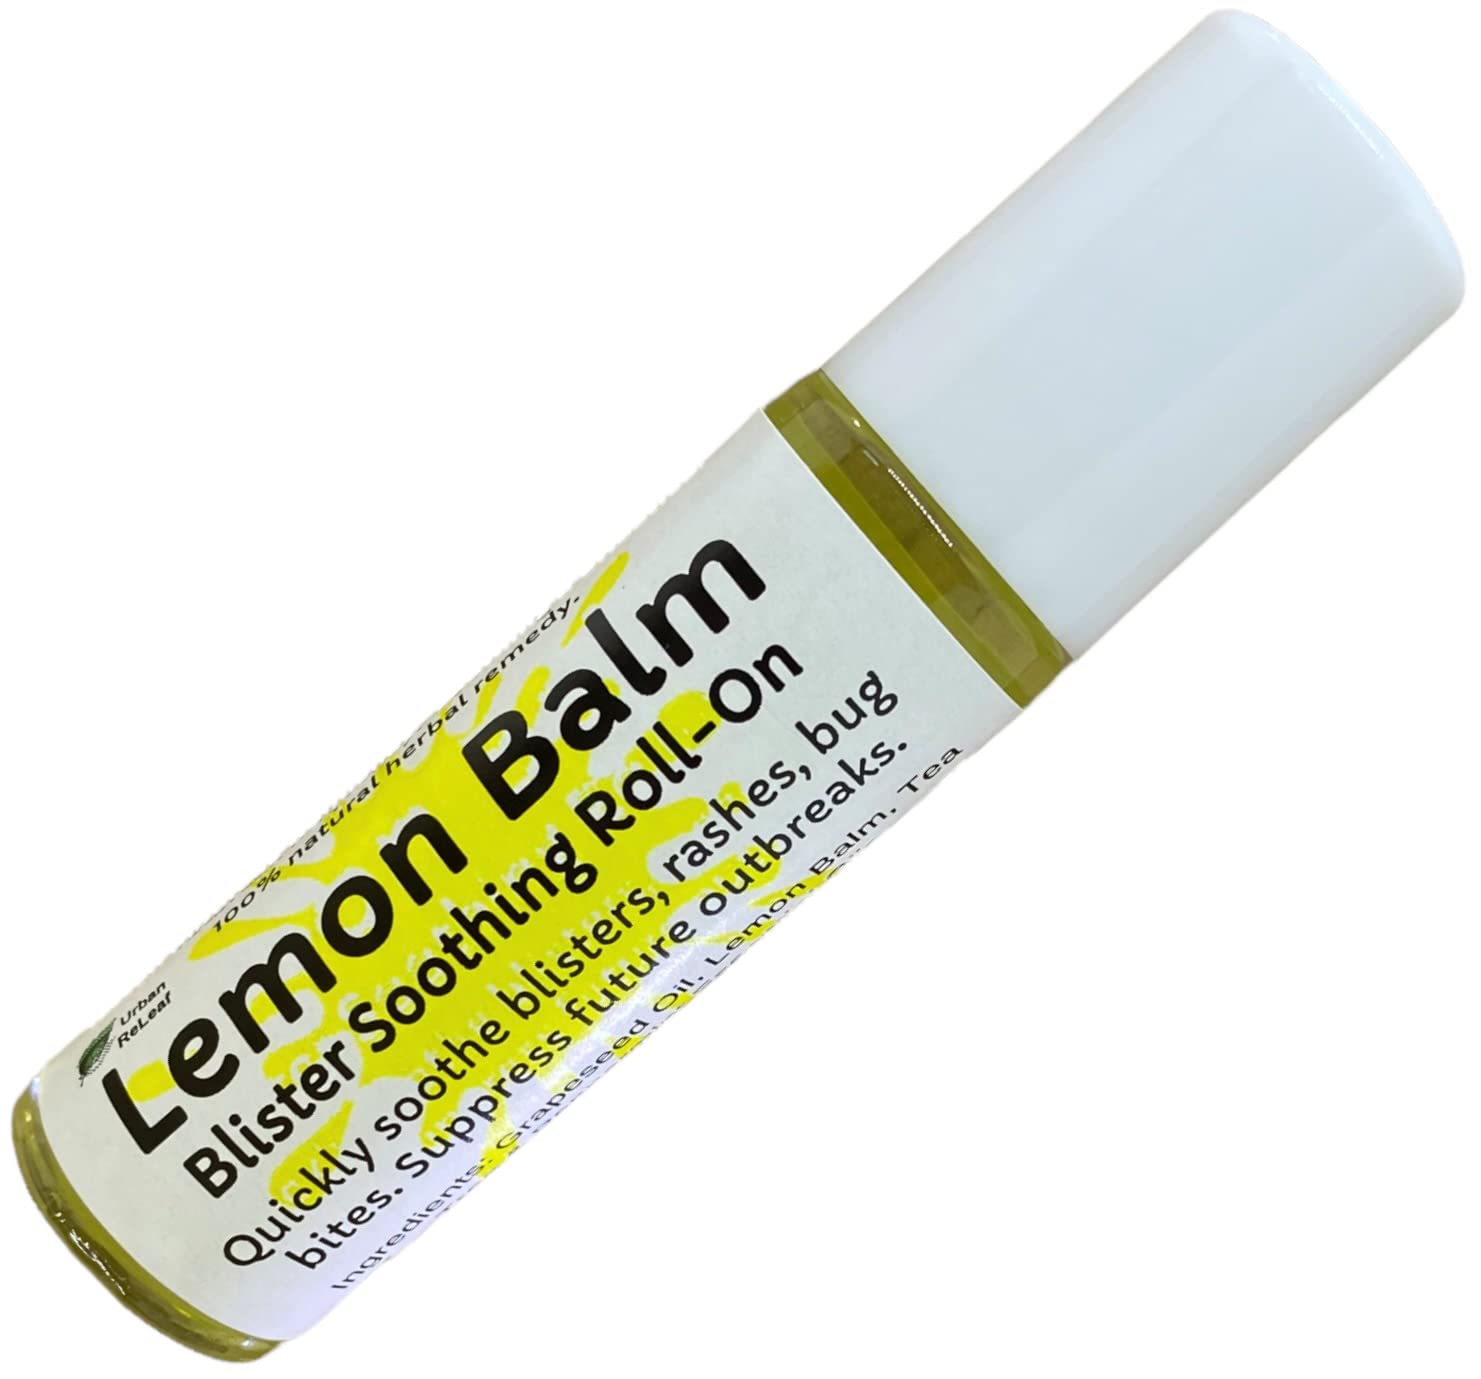 Urban ReLeaf Lemon Balm ROLL-ON! Quickly Soothe Blisters, Bumps, Rashes, Bug Bites. 100% Natural. Goodbye, Itchy red Bumps!